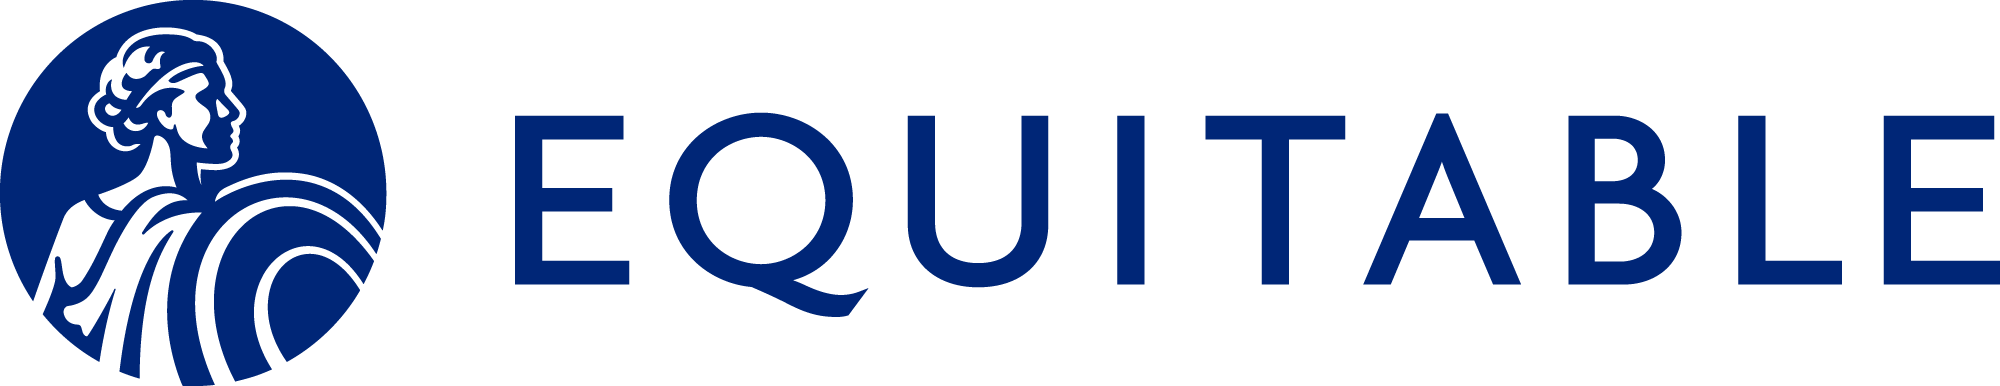 76265-Equitable_logo_horz_small_solid_rgb.png